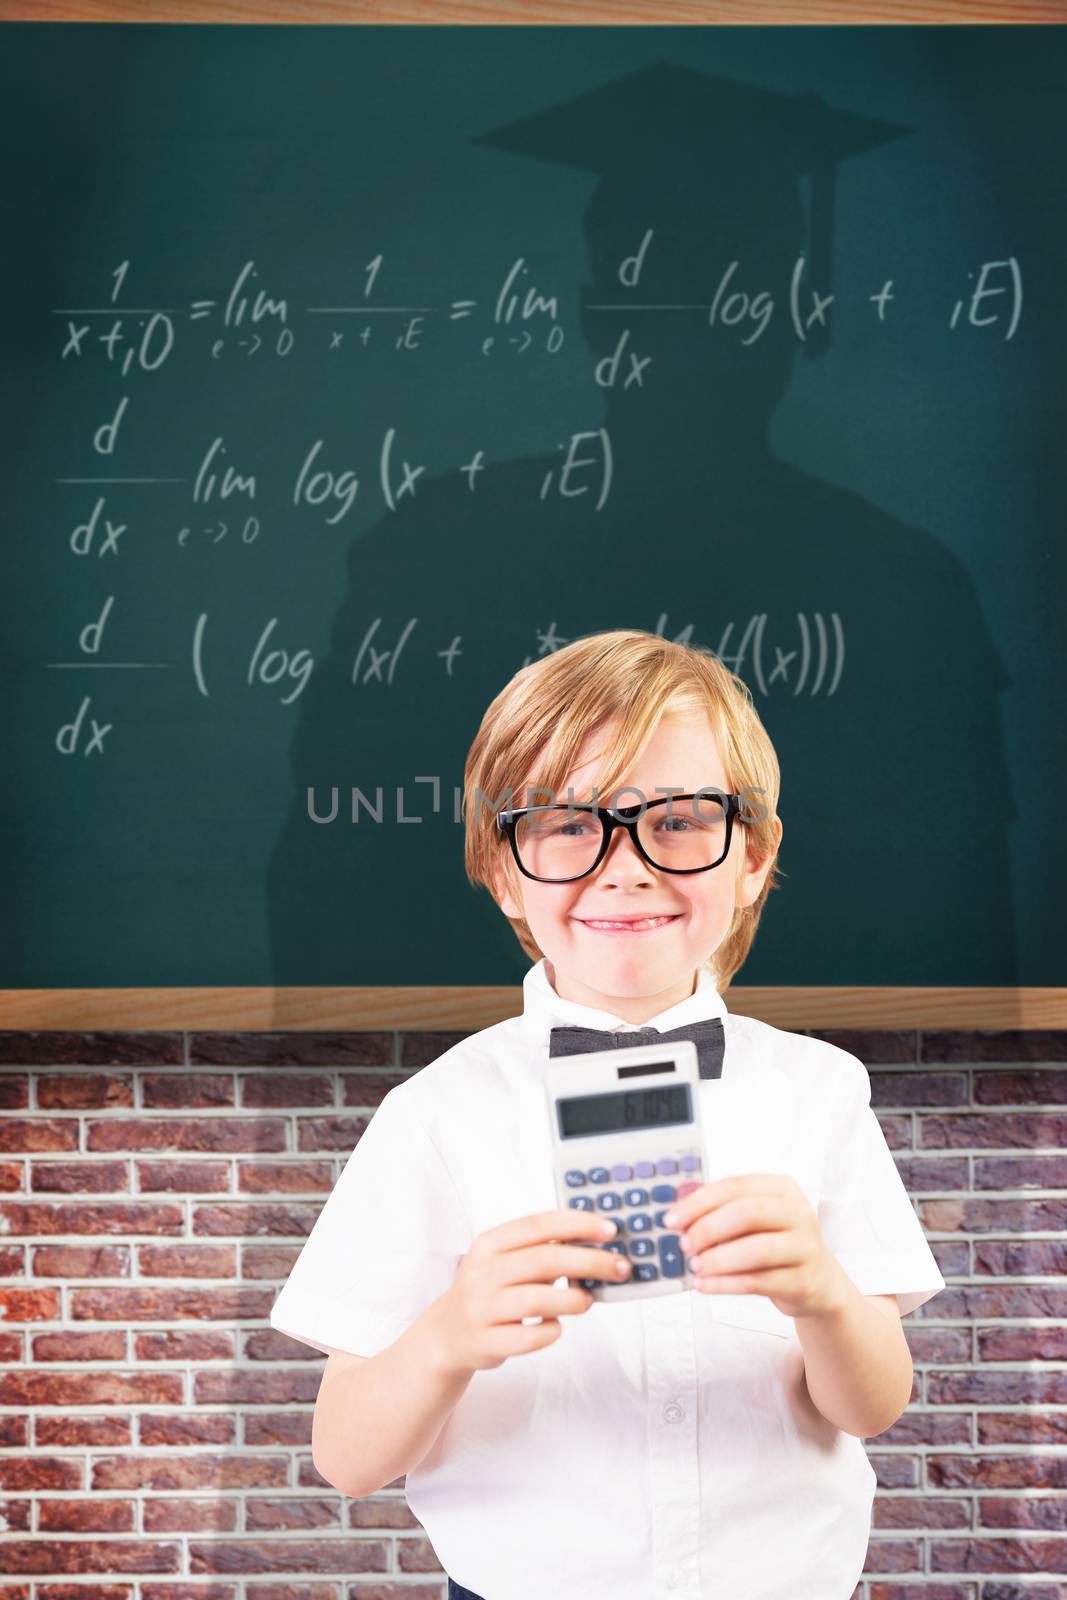 Composite image of cute pupil using calculator by Wavebreakmedia